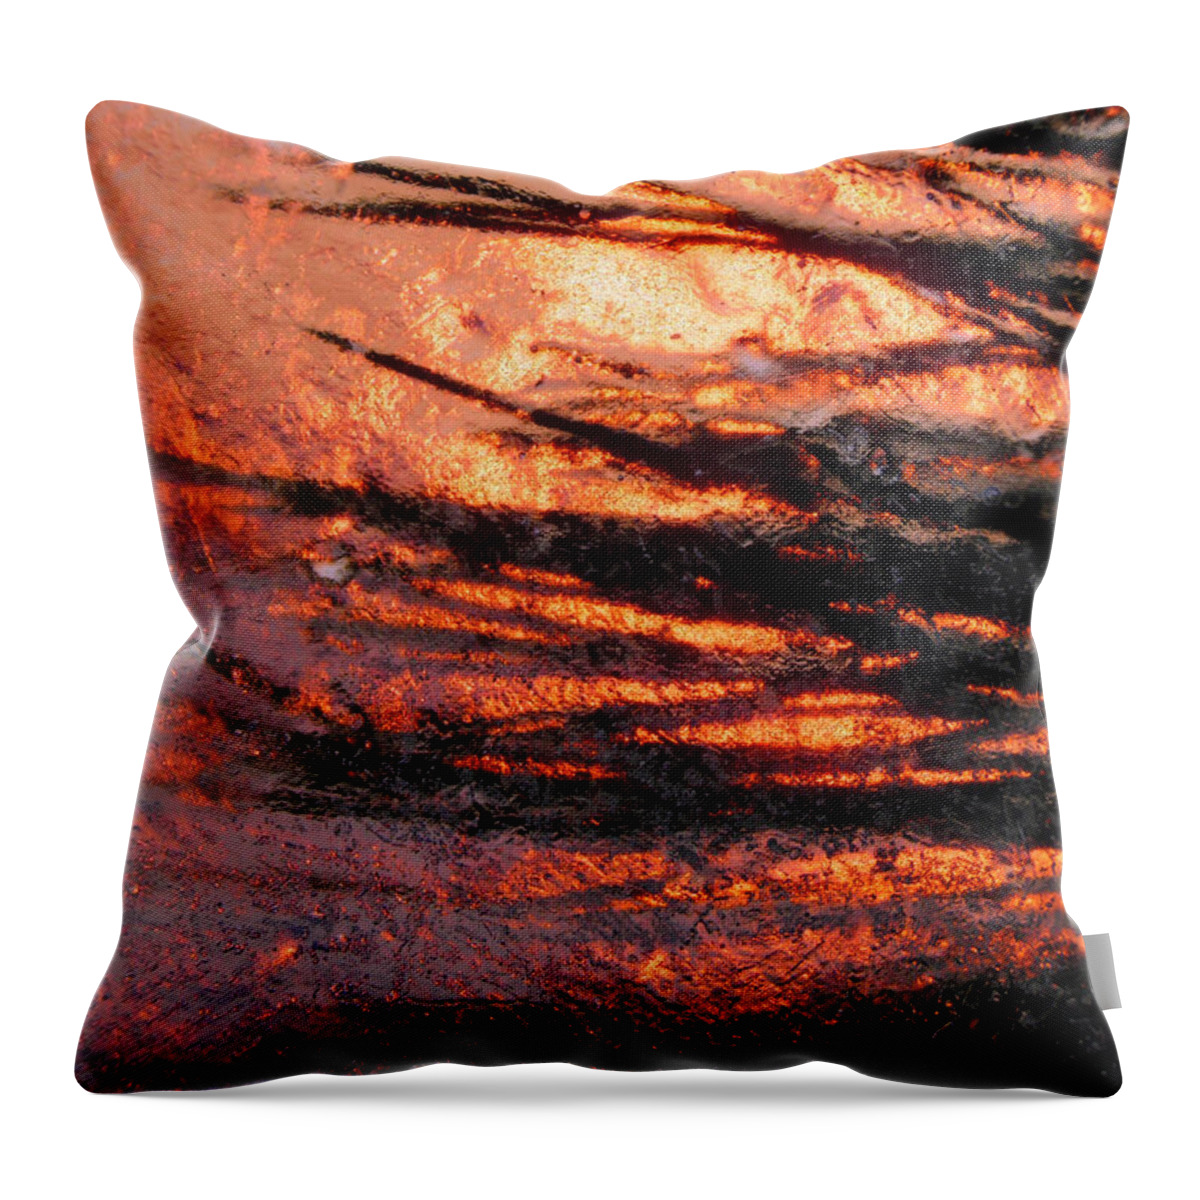 Stream Of Light Throw Pillow featuring the photograph Branches of Light by Sami Tiainen